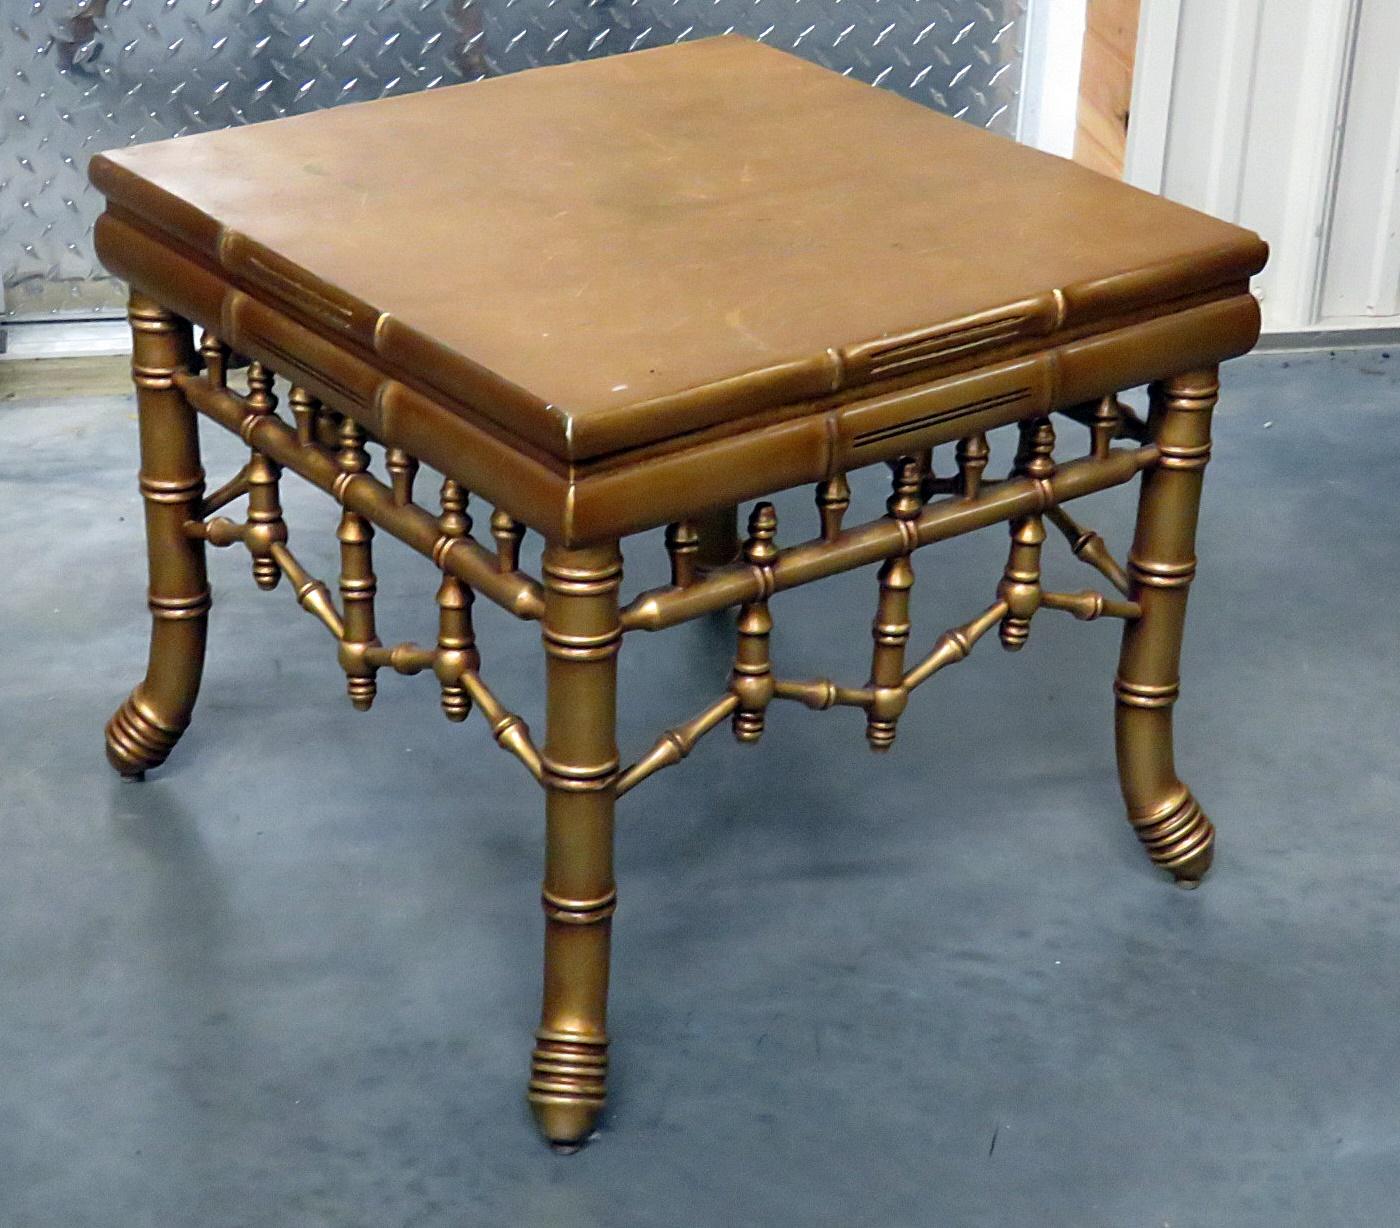 Mid-Century Modern faux bamboo side table with a distressed gilt finish.